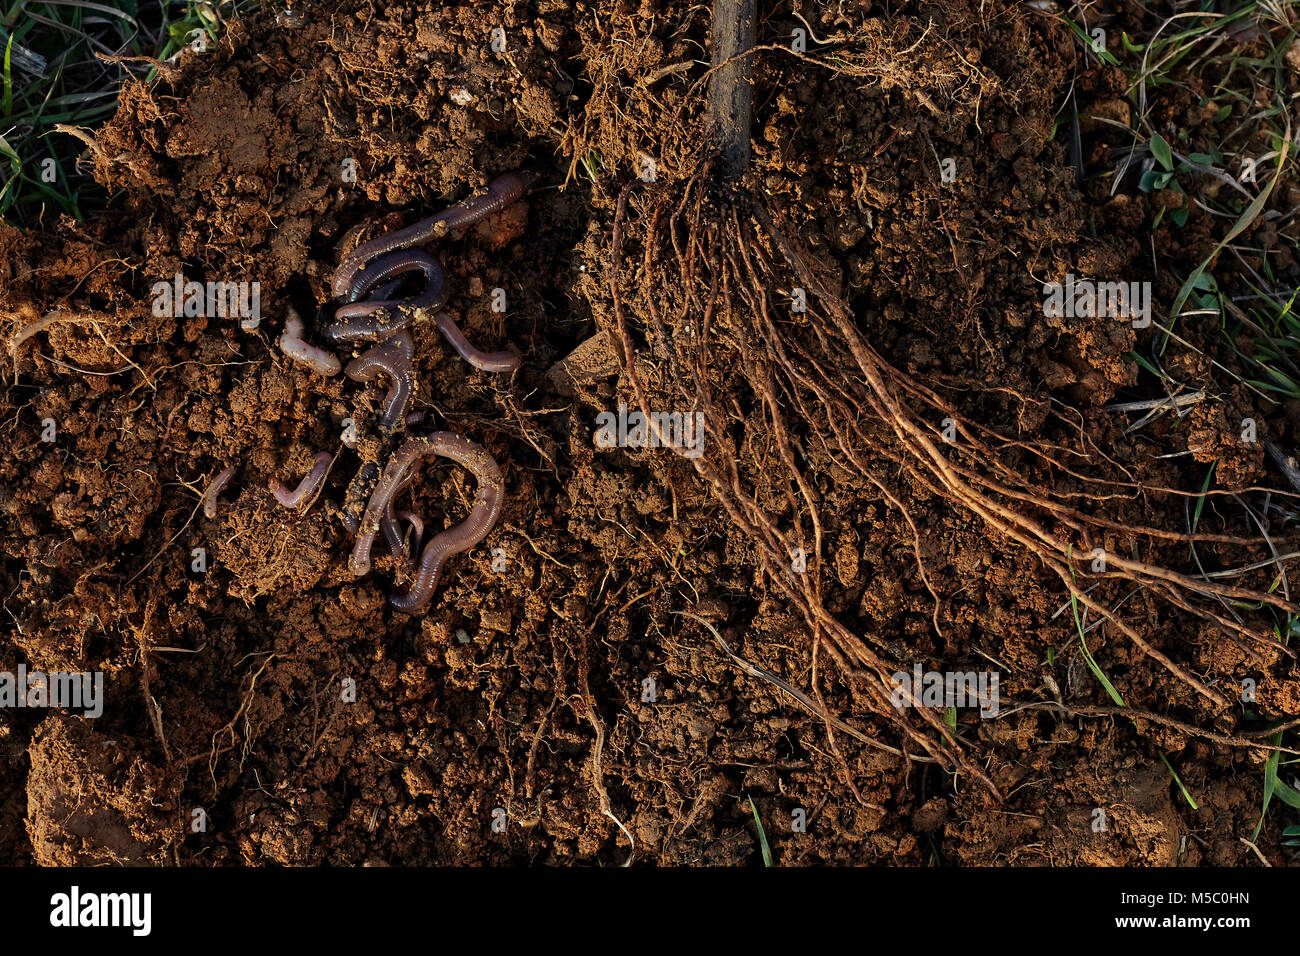 Roots of tree and worms on soil. Stock Photo